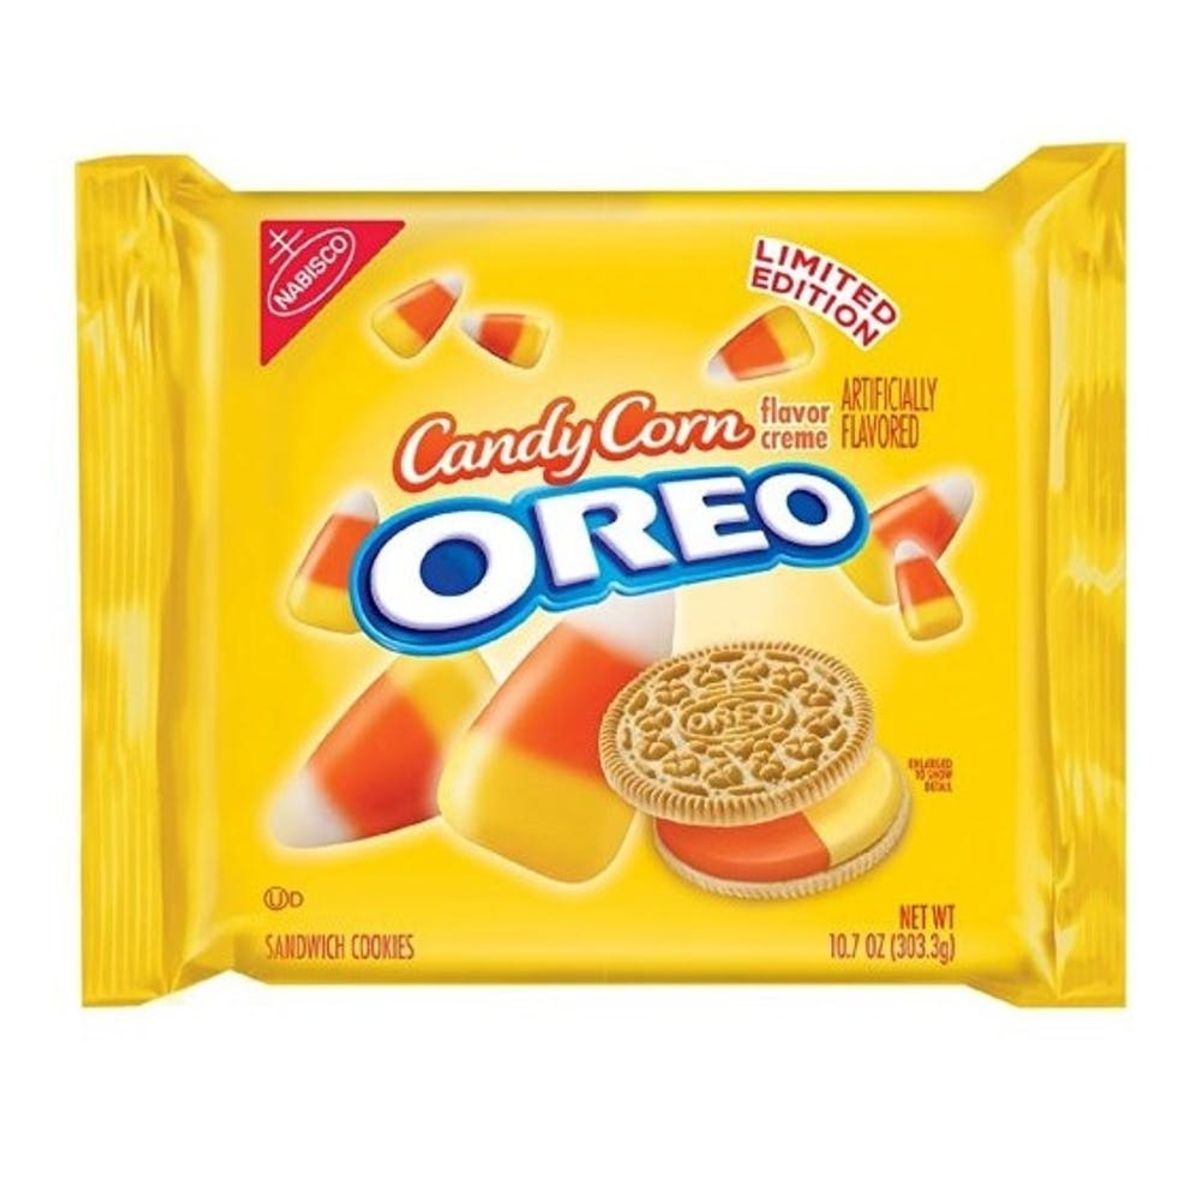 Candy Corn Oreos Are Now a Thing